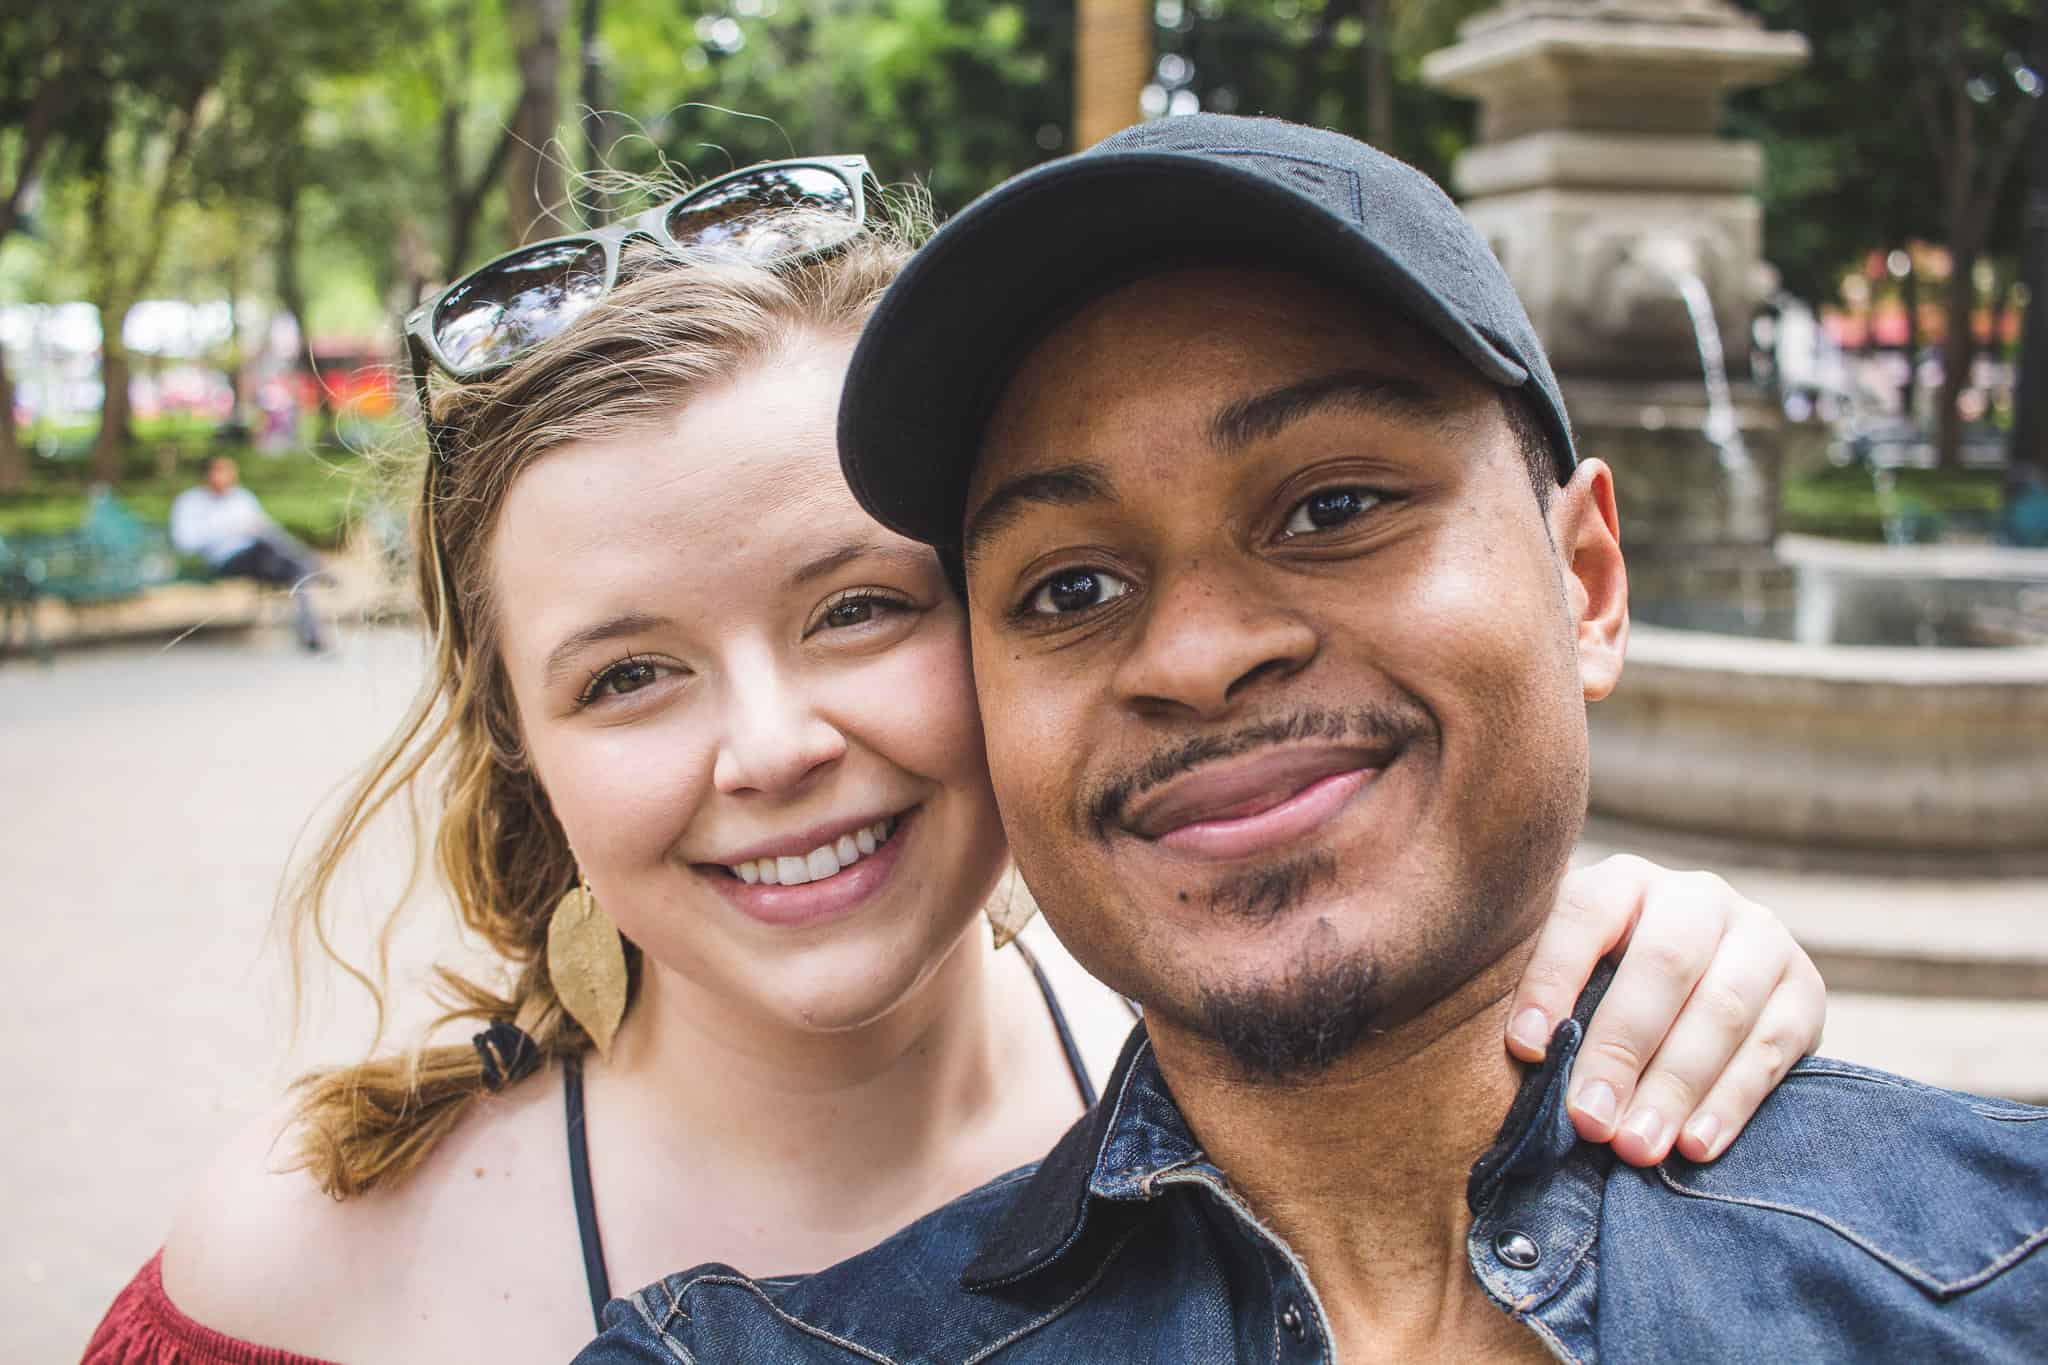 man and woman smiling together in a park in mexico city